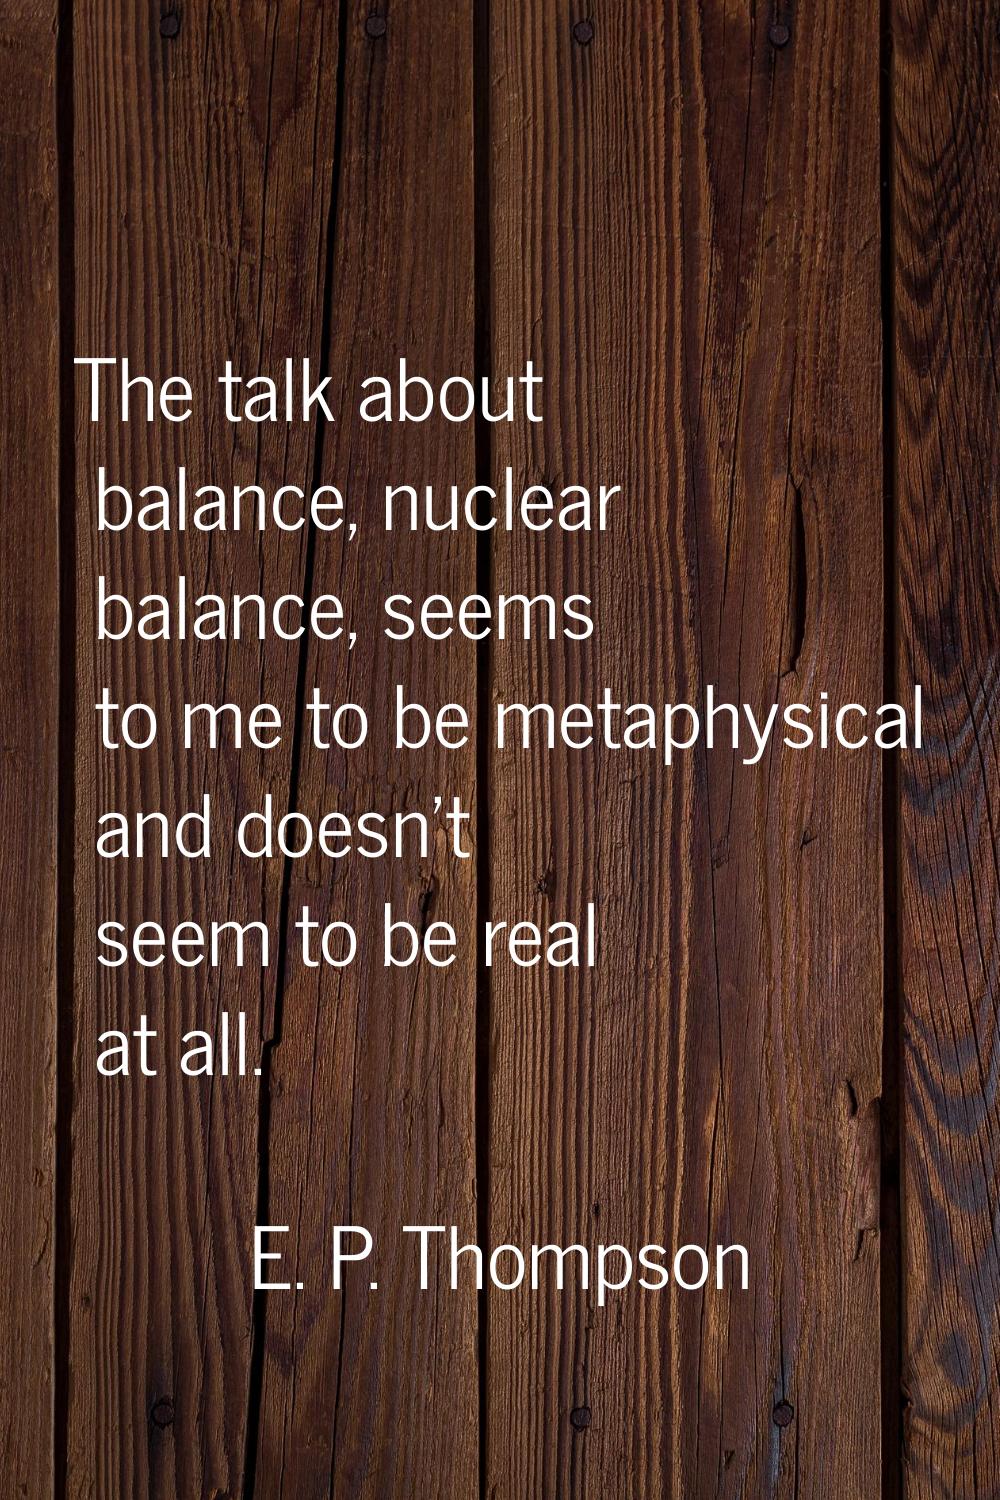 The talk about balance, nuclear balance, seems to me to be metaphysical and doesn't seem to be real